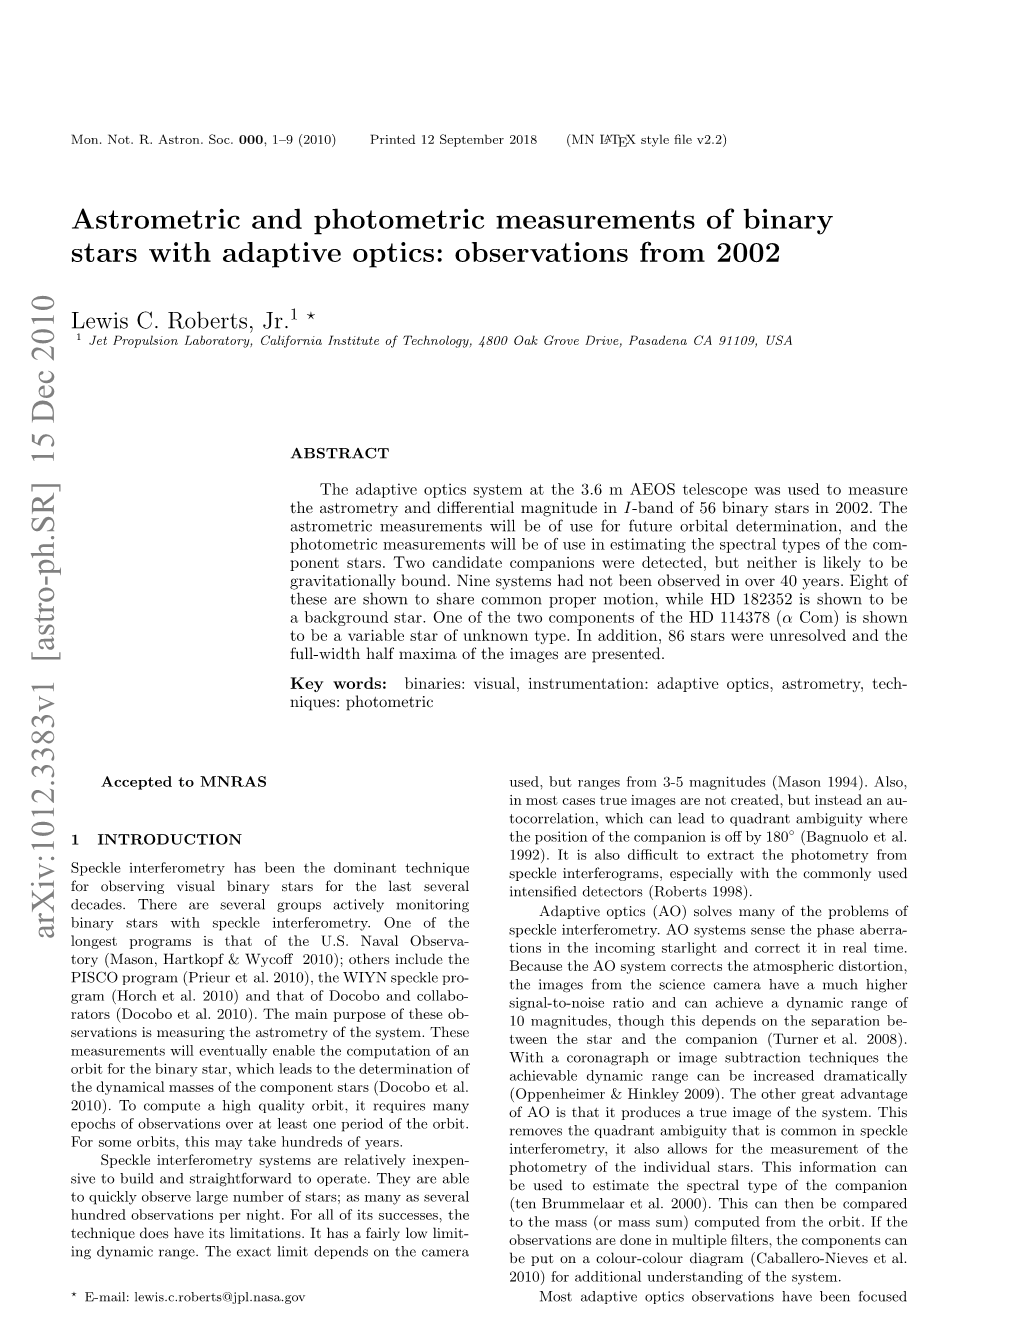 Astrometric and Photometric Measurements of Binary Stars with Adaptive Optics: Observations from 2002